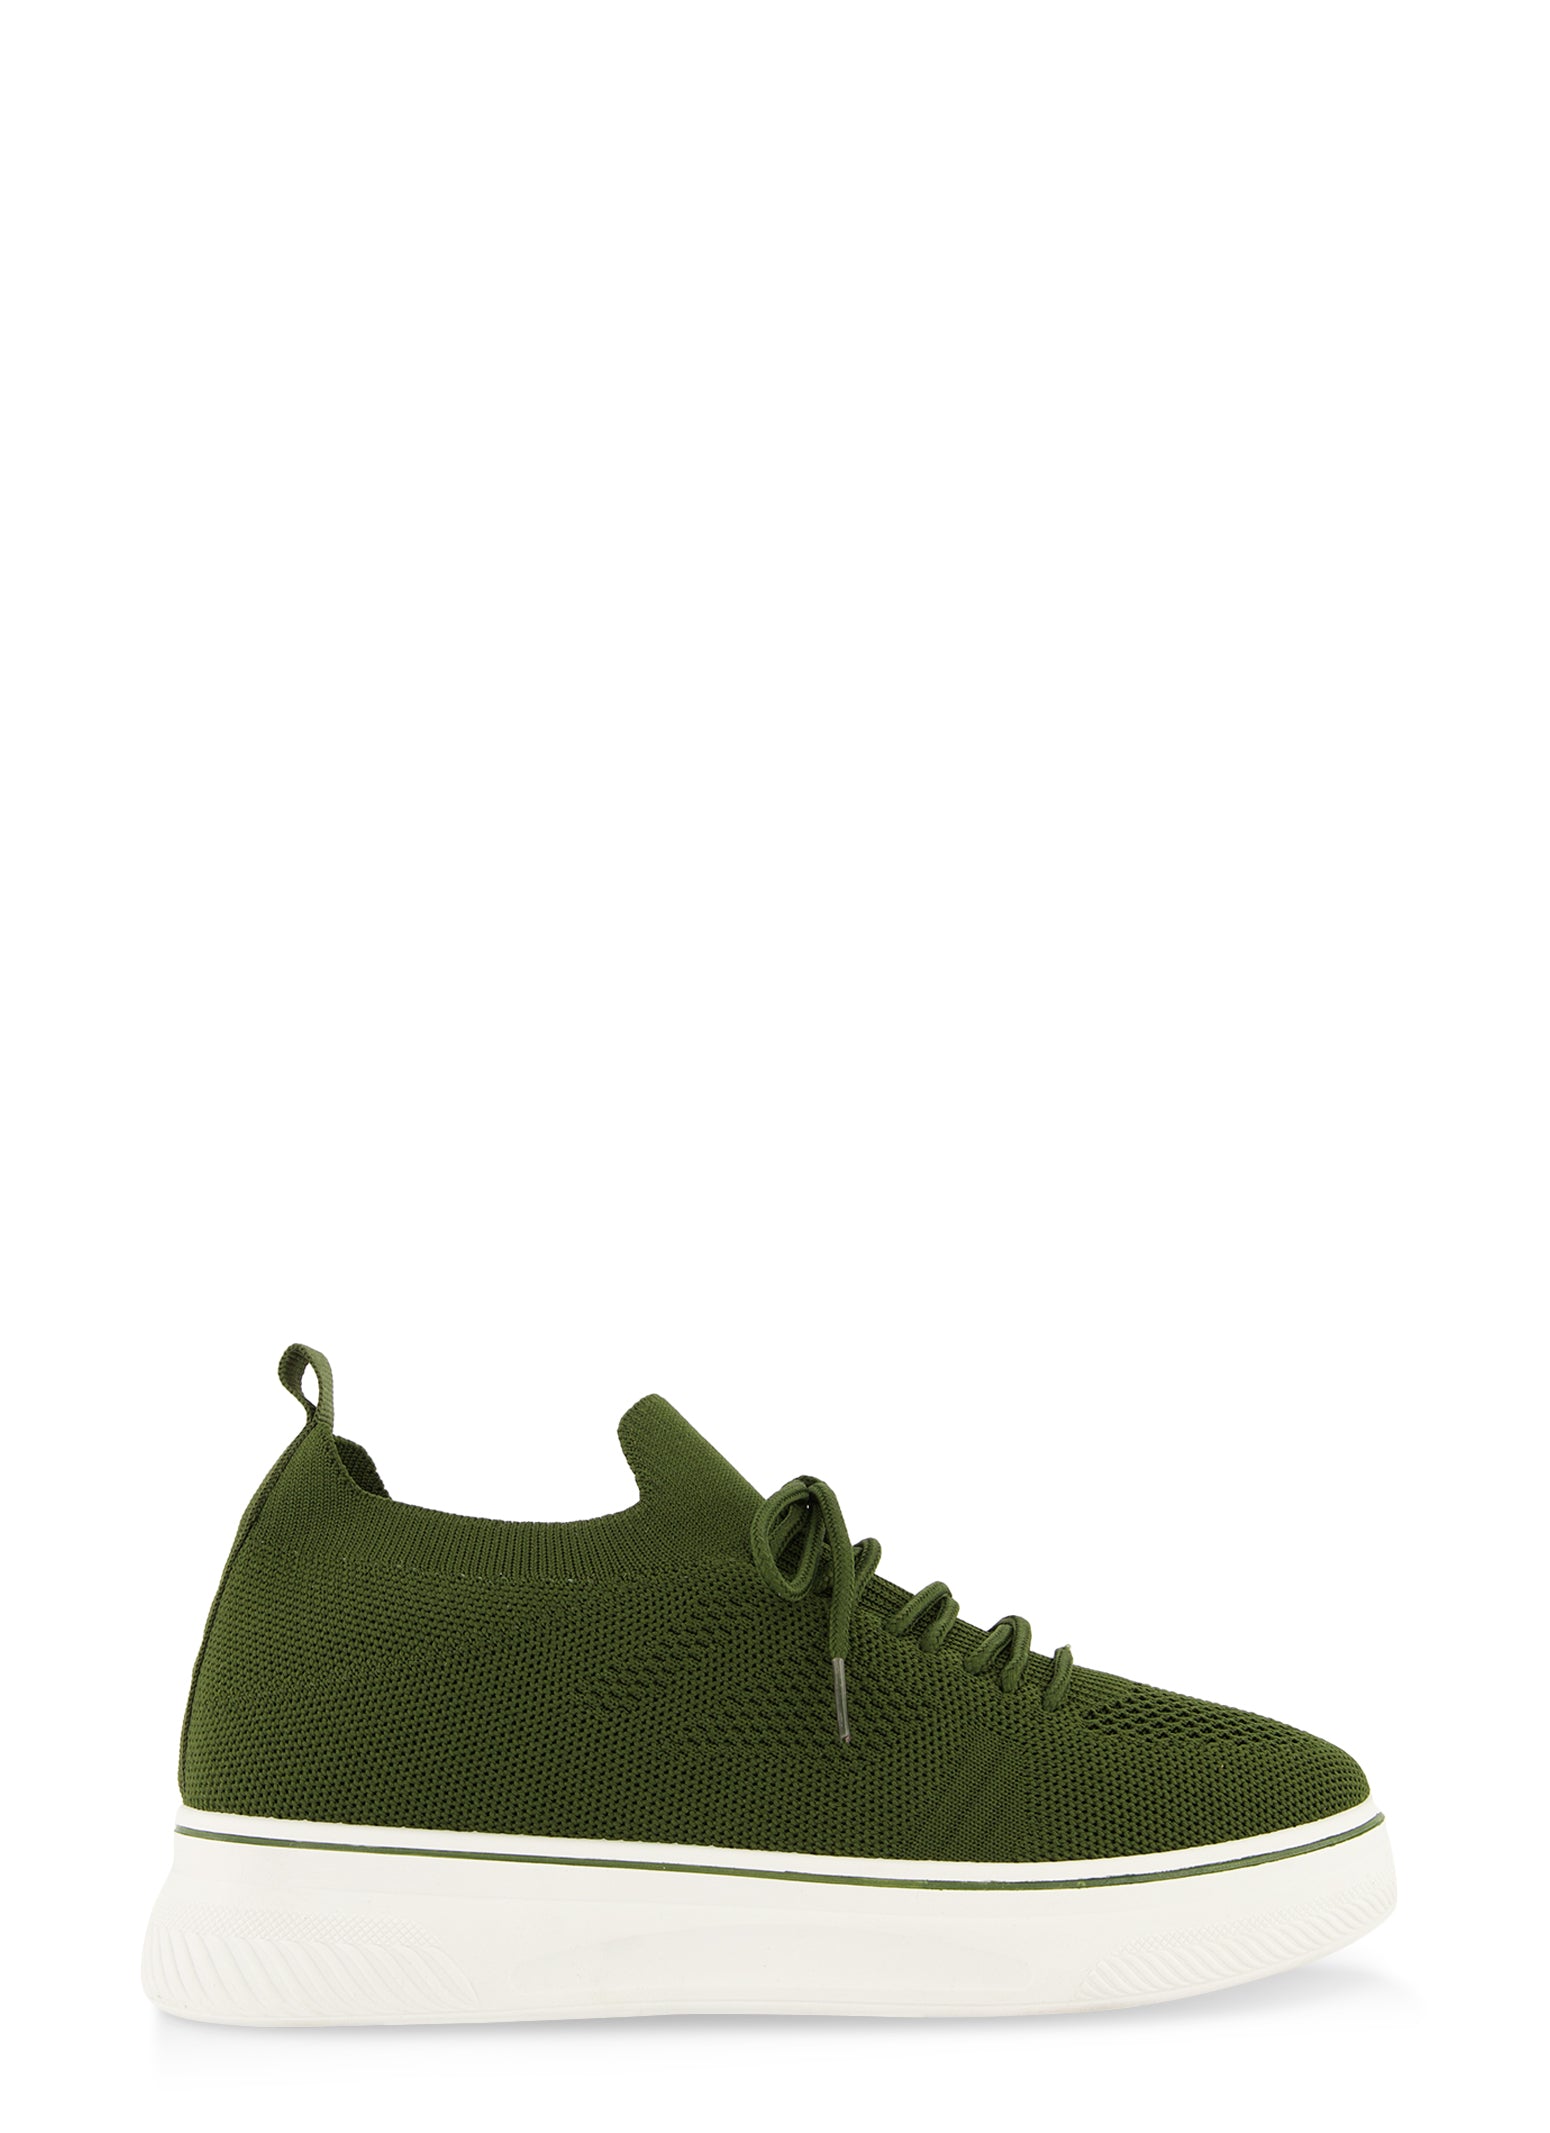 Textured Knit Lace Up Platform Sneakers